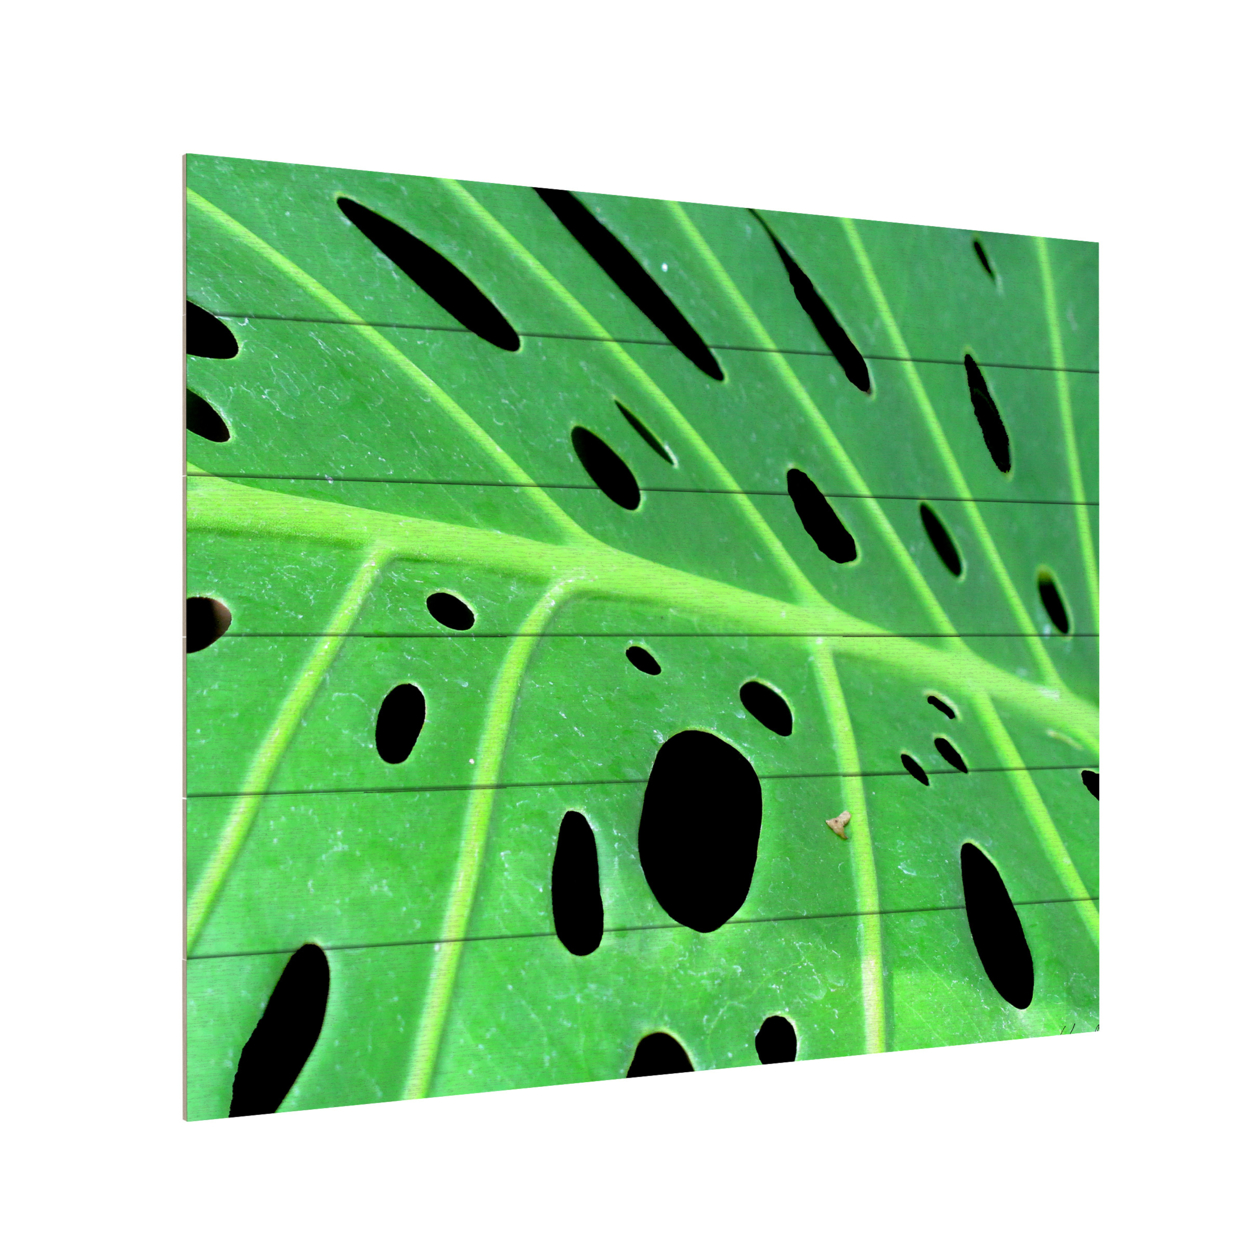 Wooden Slat Art 18 X 22 Inches Titled Tropical Leaf Ready To Hang Home Decor Picture